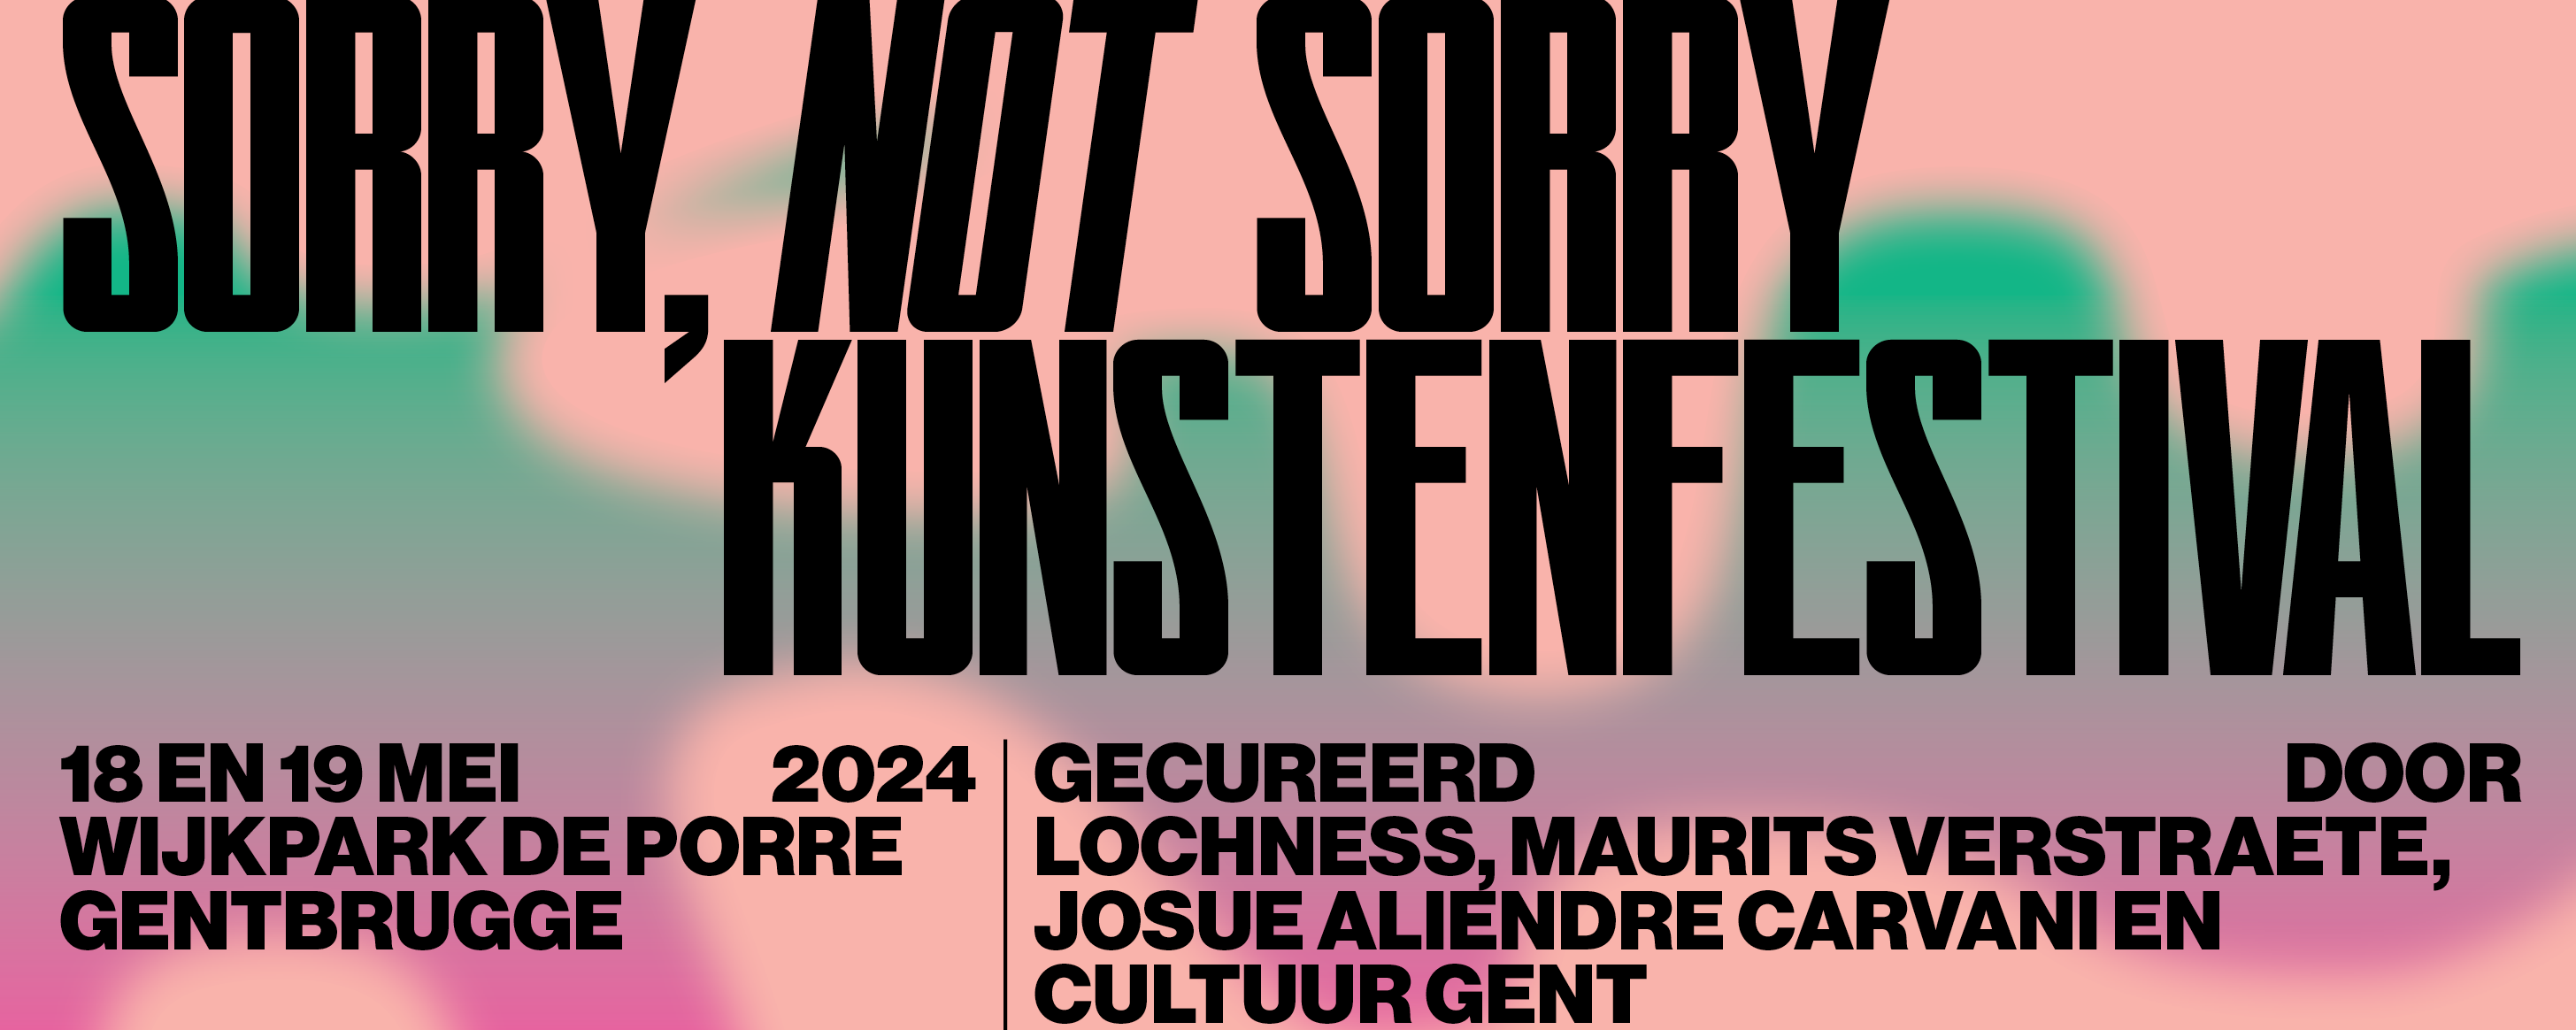 Sorry, Not Sorry kunstenfestival